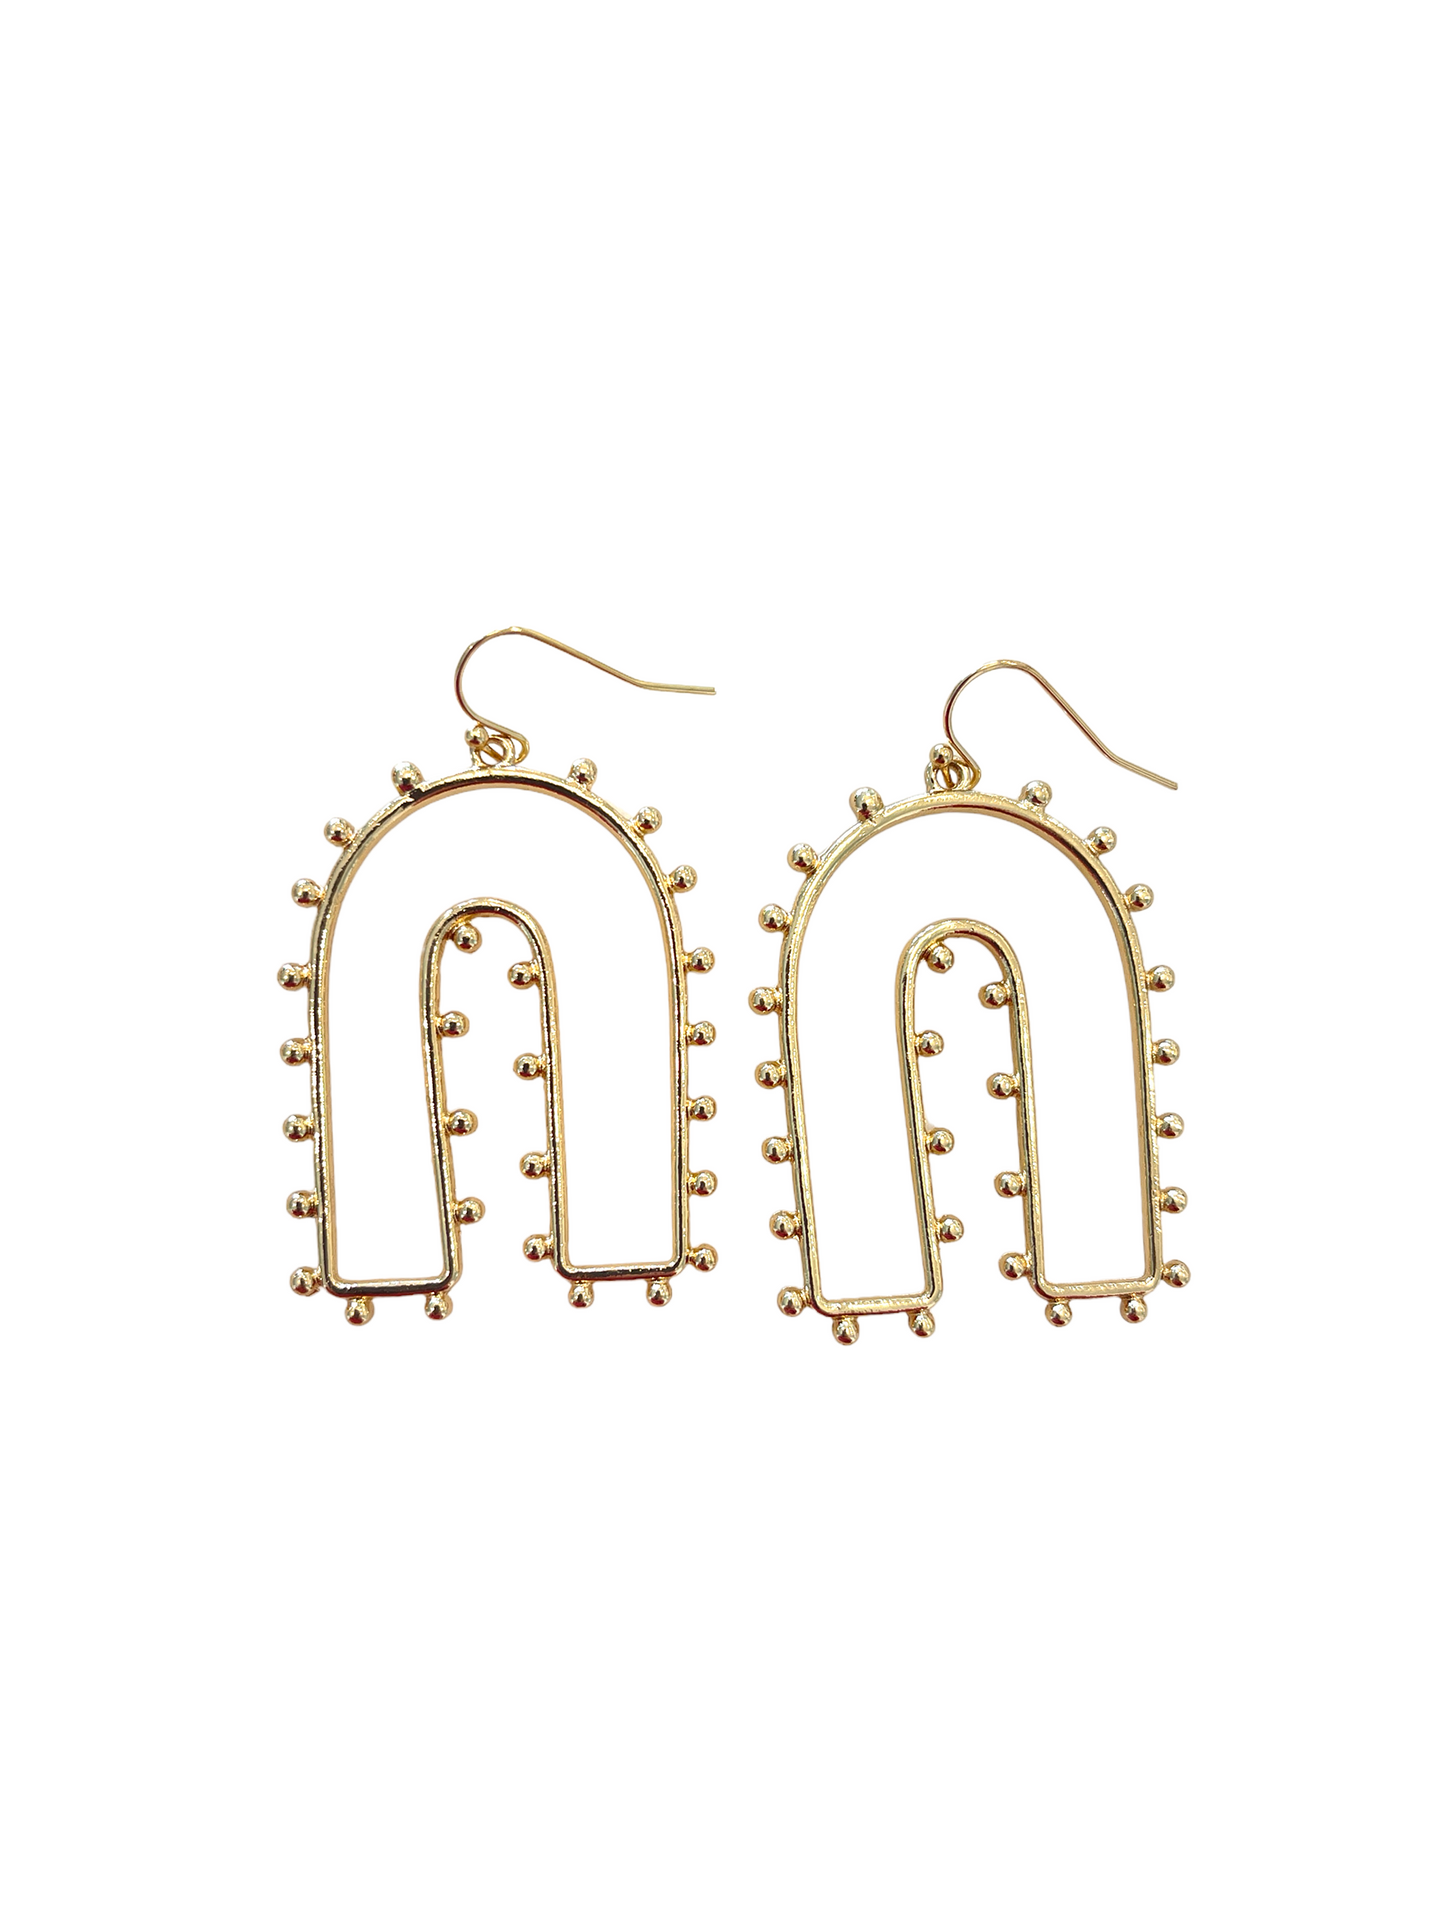 Studded Gold Arch Earrings